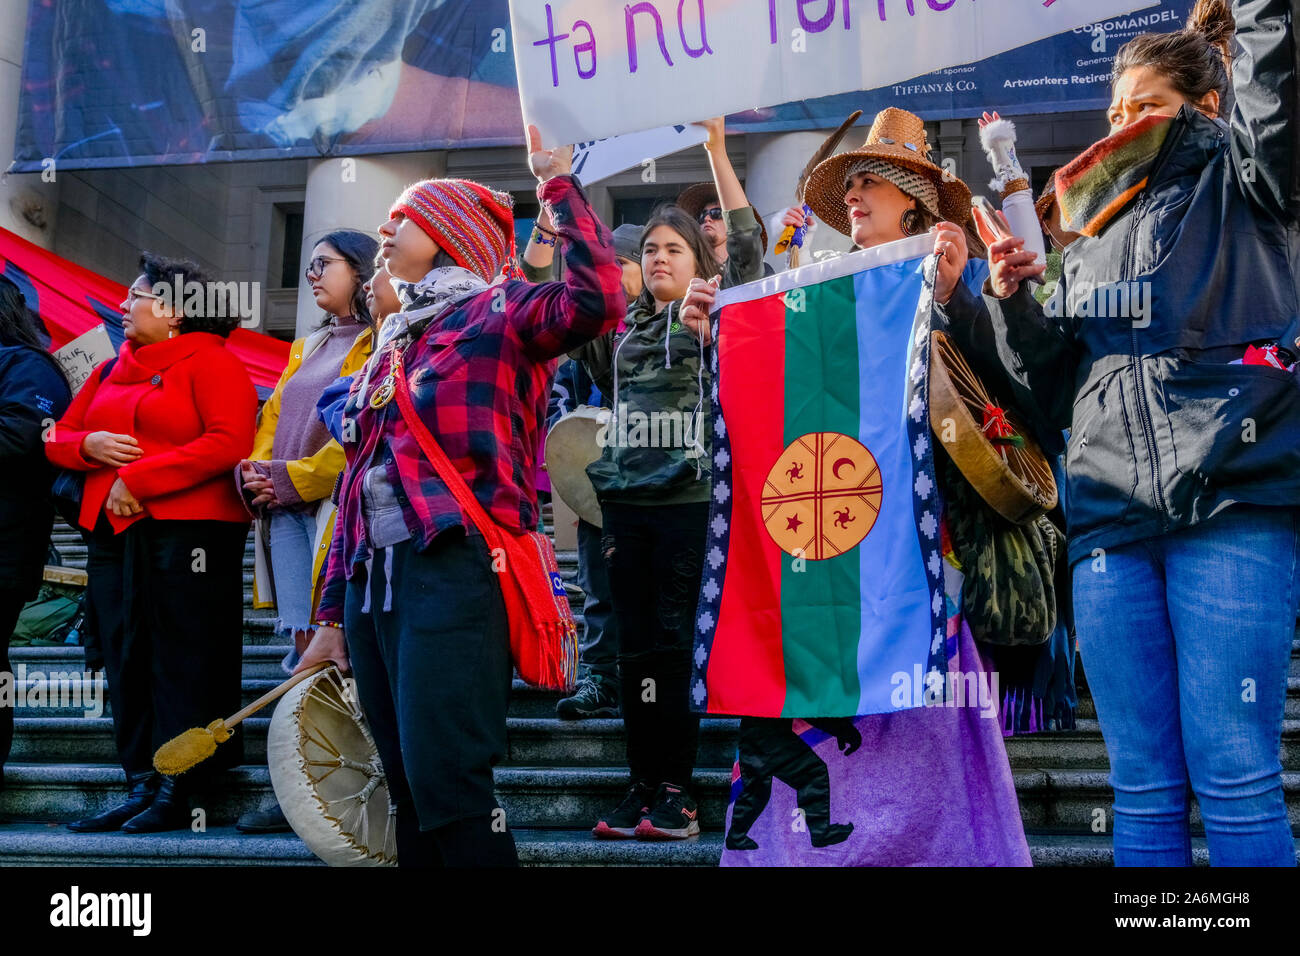 Indigenous activists at Climate Strike, Vancouver, British Columbia, Canada Stock Photo